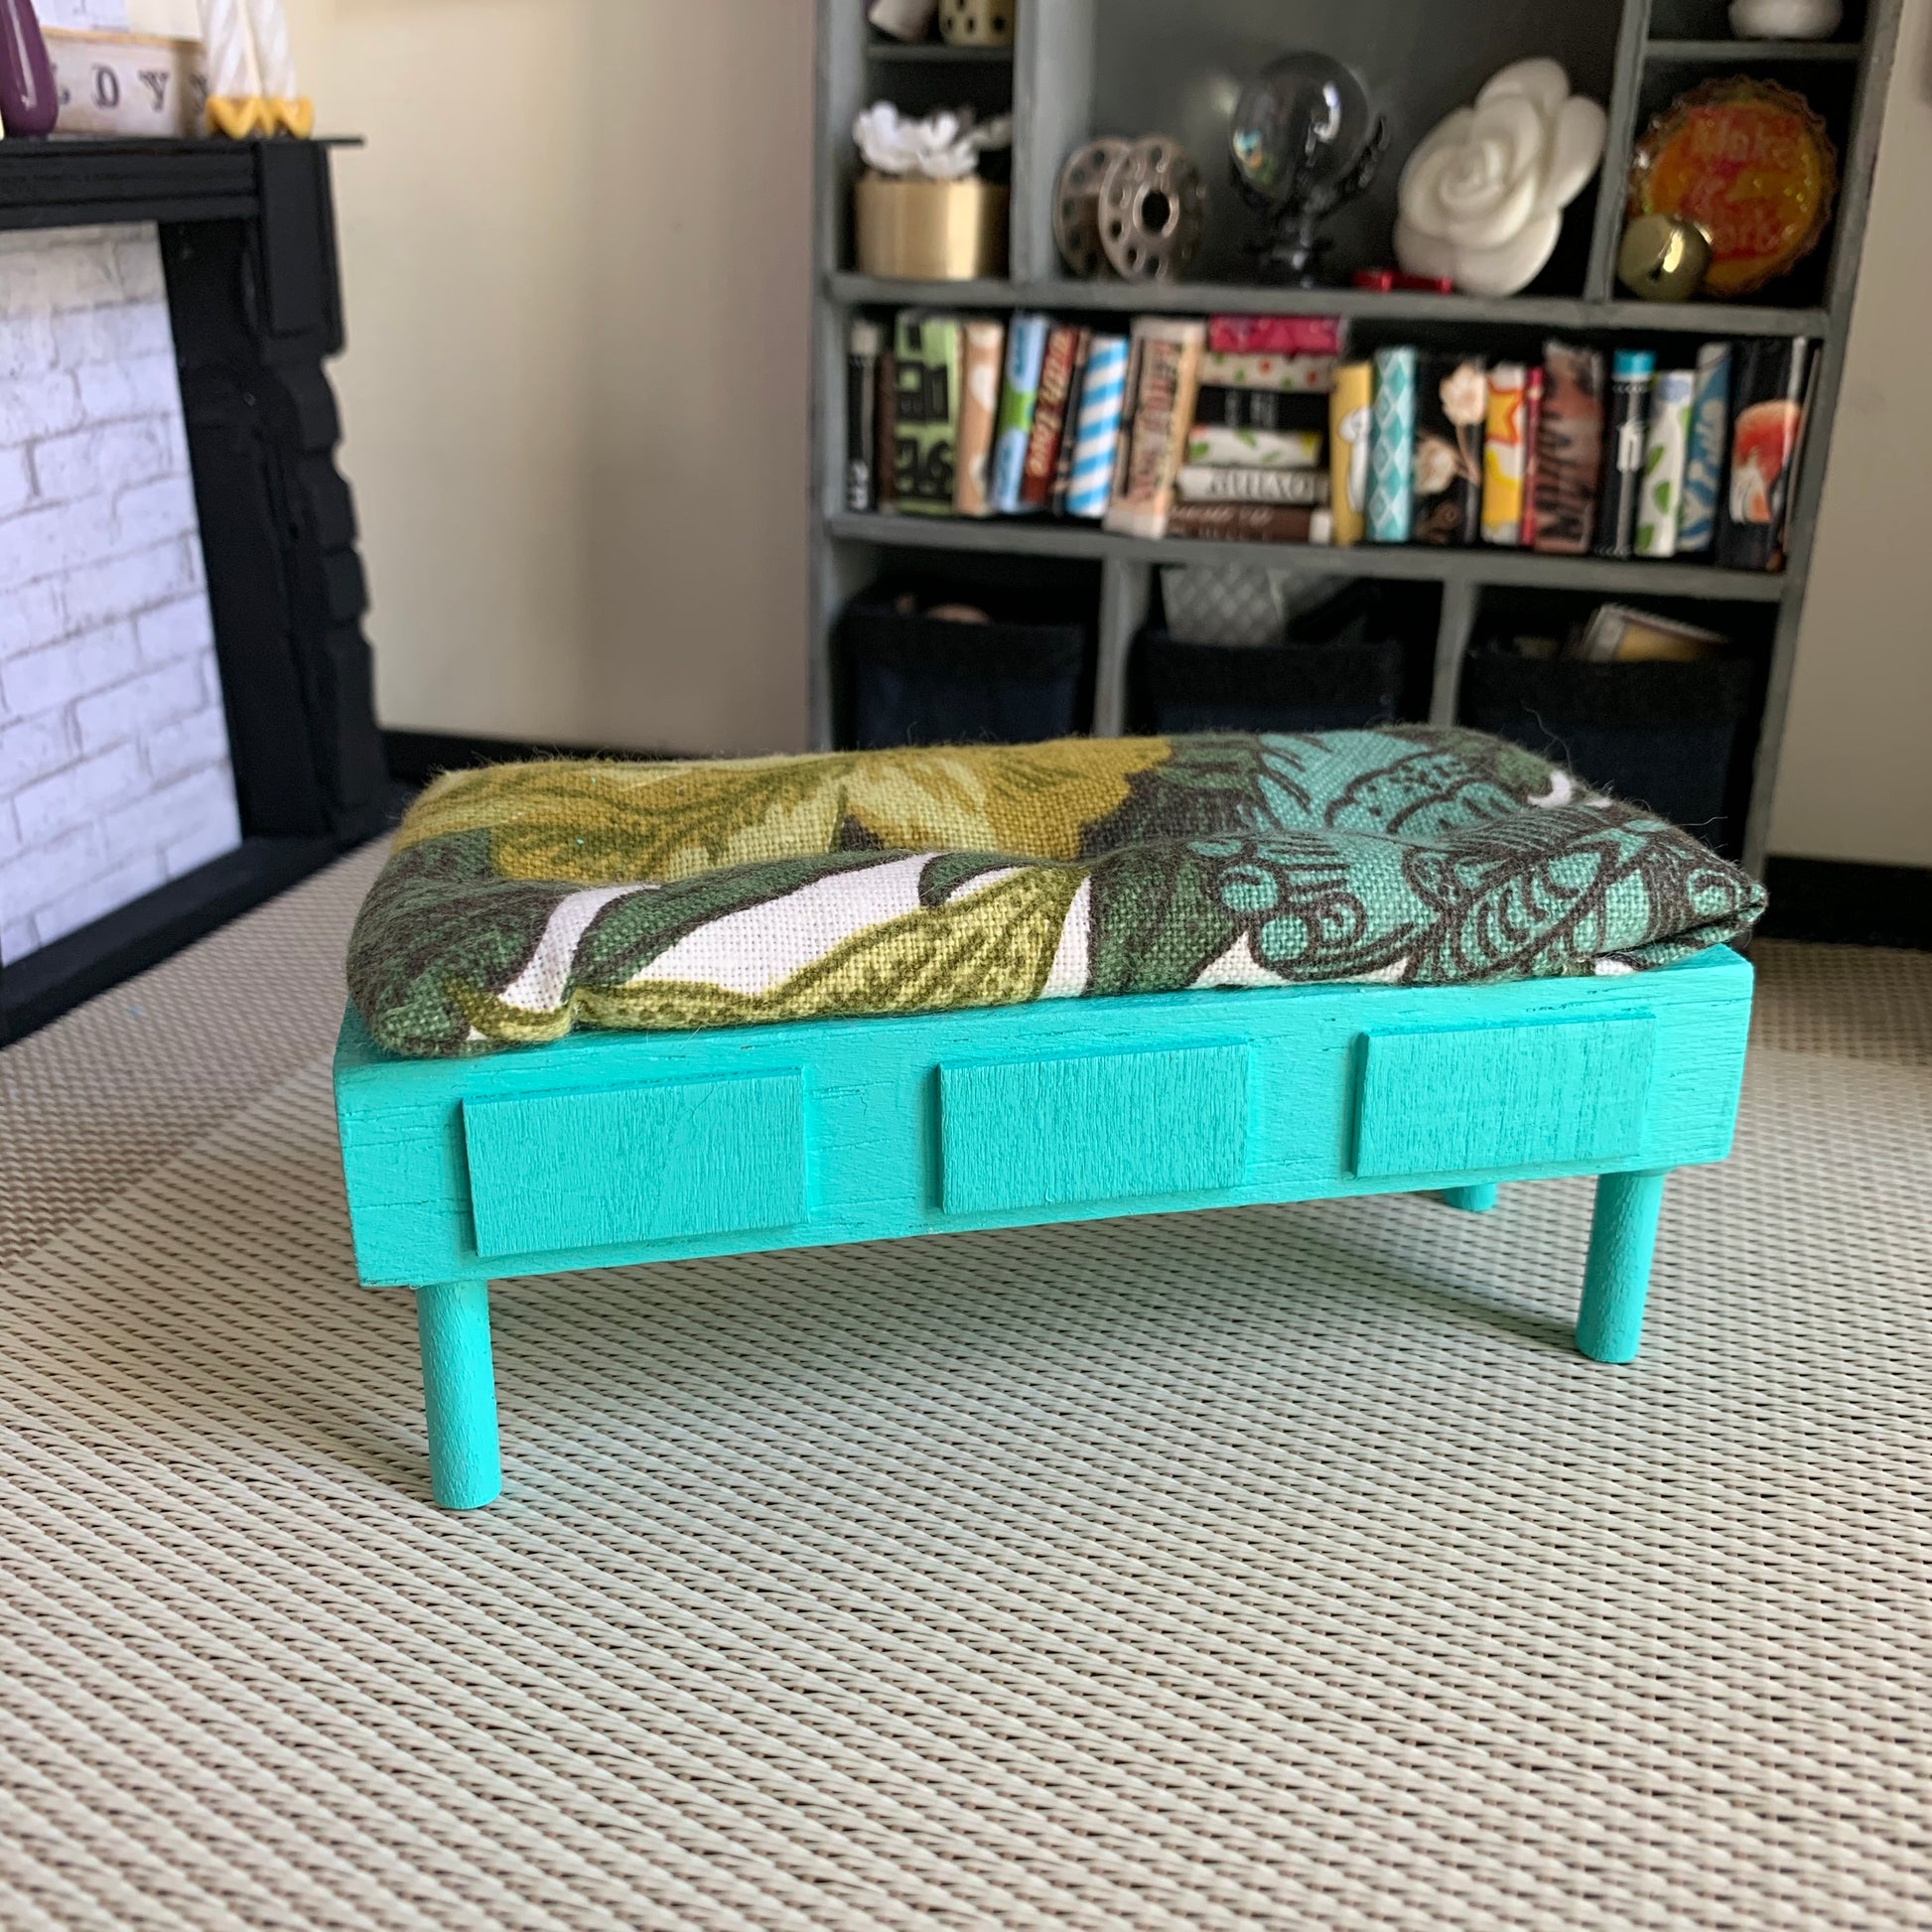 a miniature dollhouse bench, in a dollhouse room for scale. This one has a green and teal floral cushion, with turquoise "storage" and legs